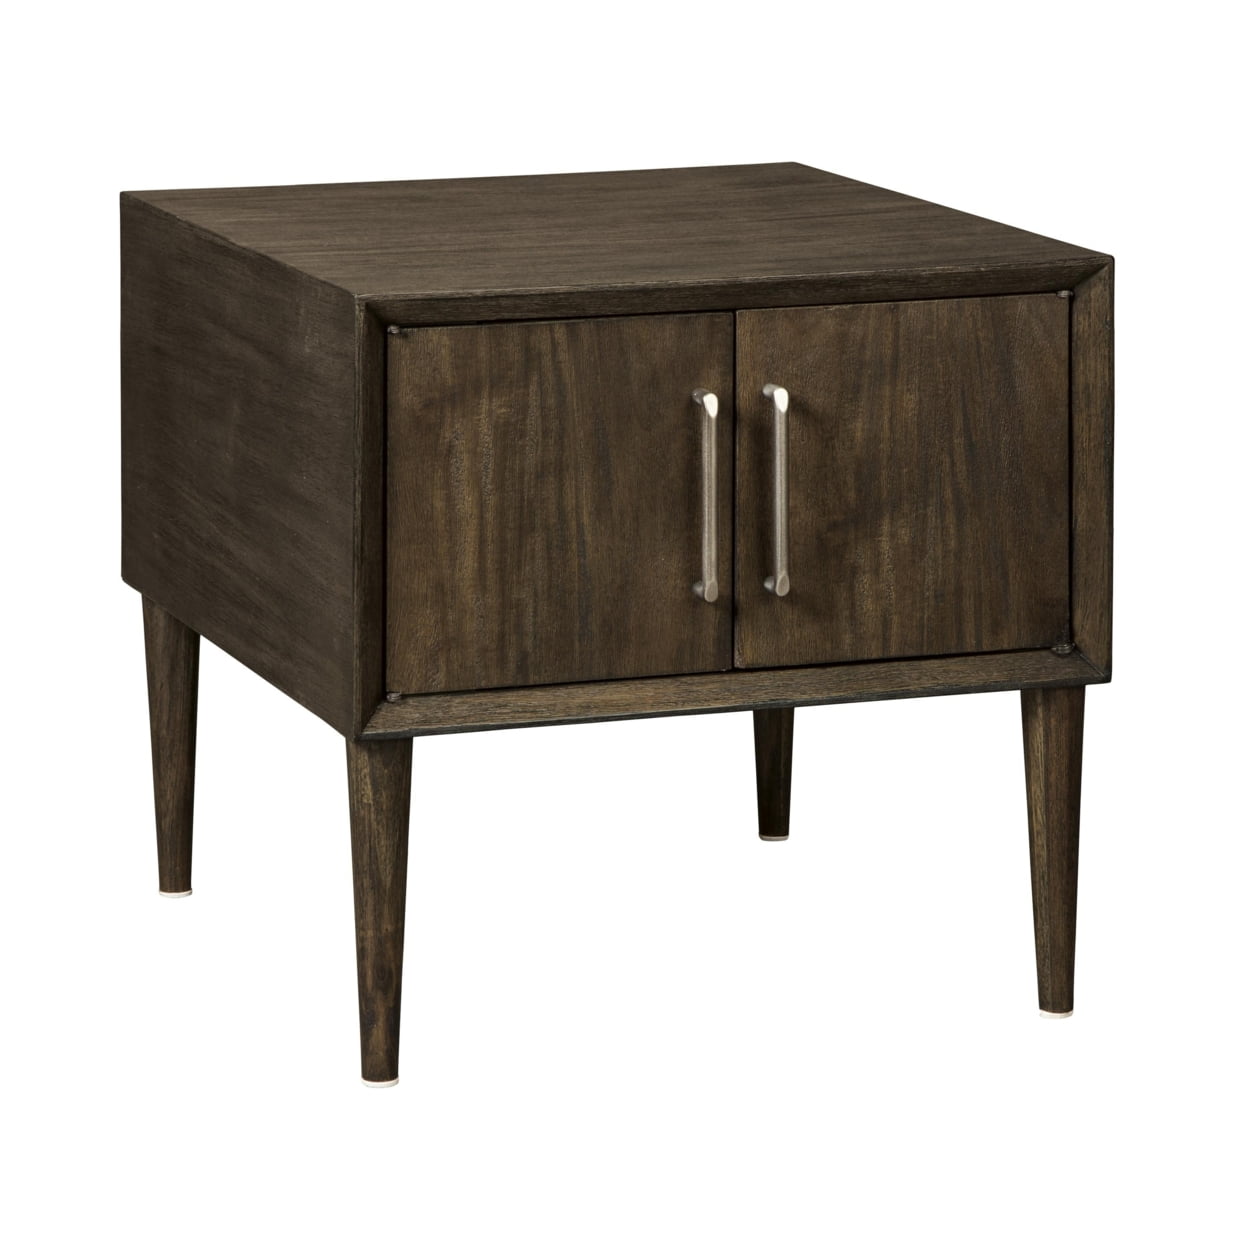 Picture of Benjara BM210891 Square Wooden Frame End Table with Tapered Legs & Metal Pulls - Brown - 22.13 x 22.13 x 23.88 in.